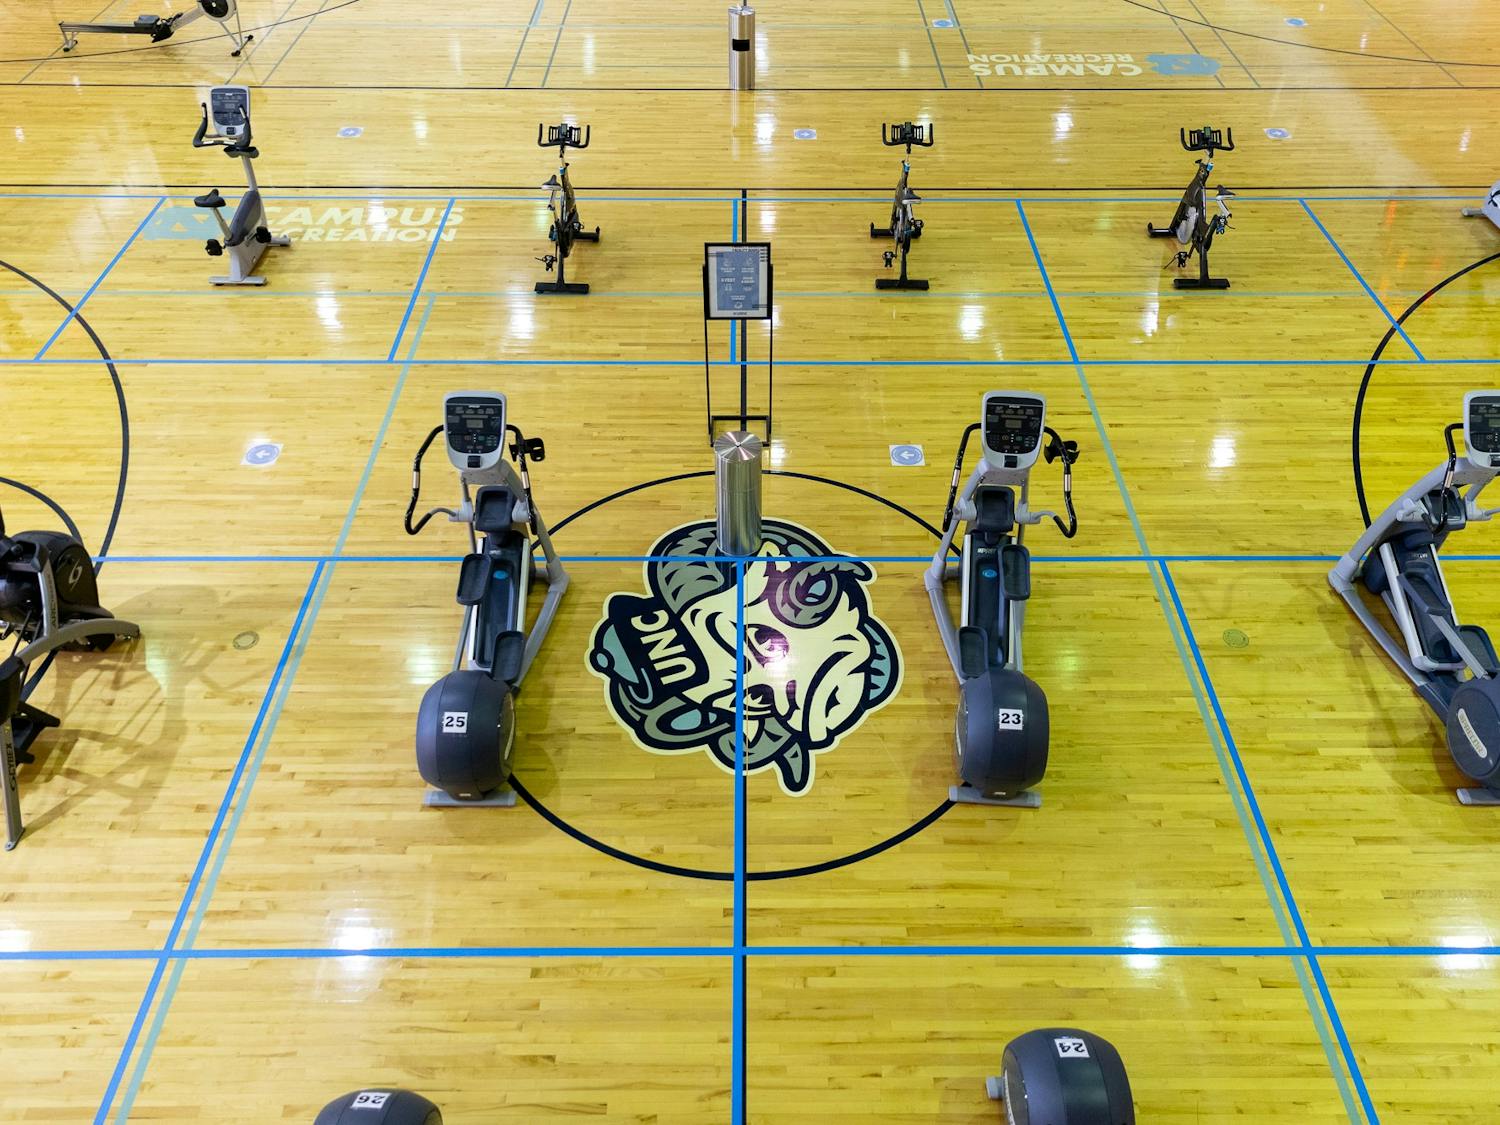 Cardio machines lie on the basketball courts in Ram’s Head gym on UNC’s campus on Feb. 6, 2021.